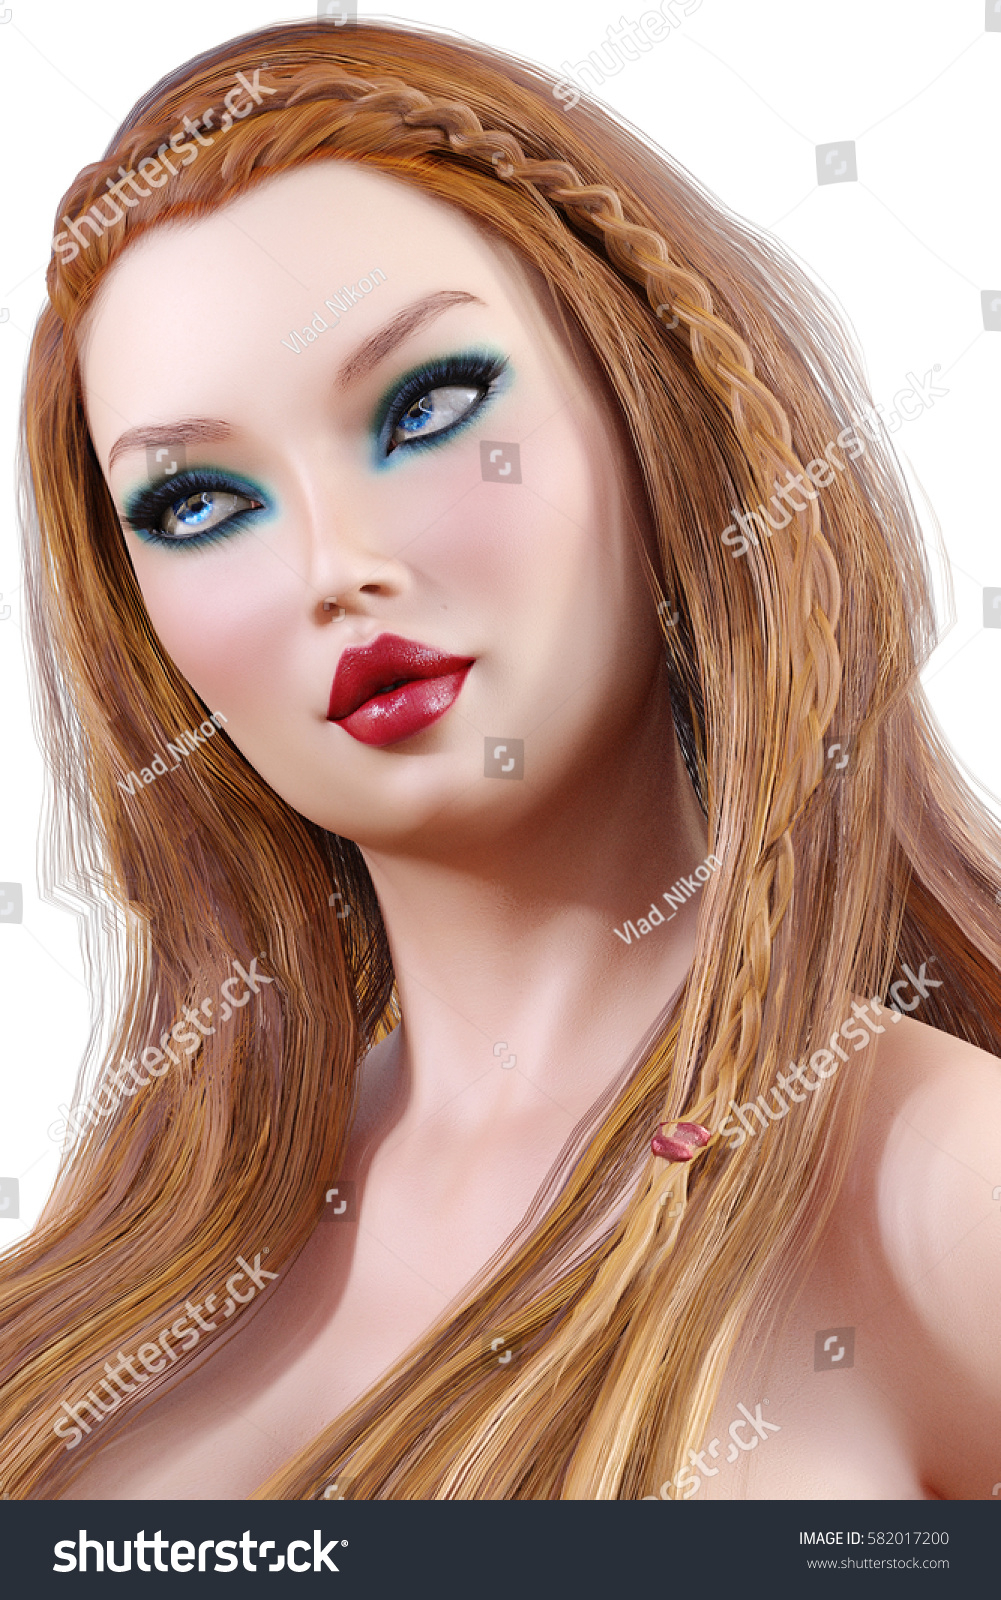 Blonde Hair Blue Eyes Makeup Royalty Free Stock Illustration Of Portrait Beautiful Young Girl